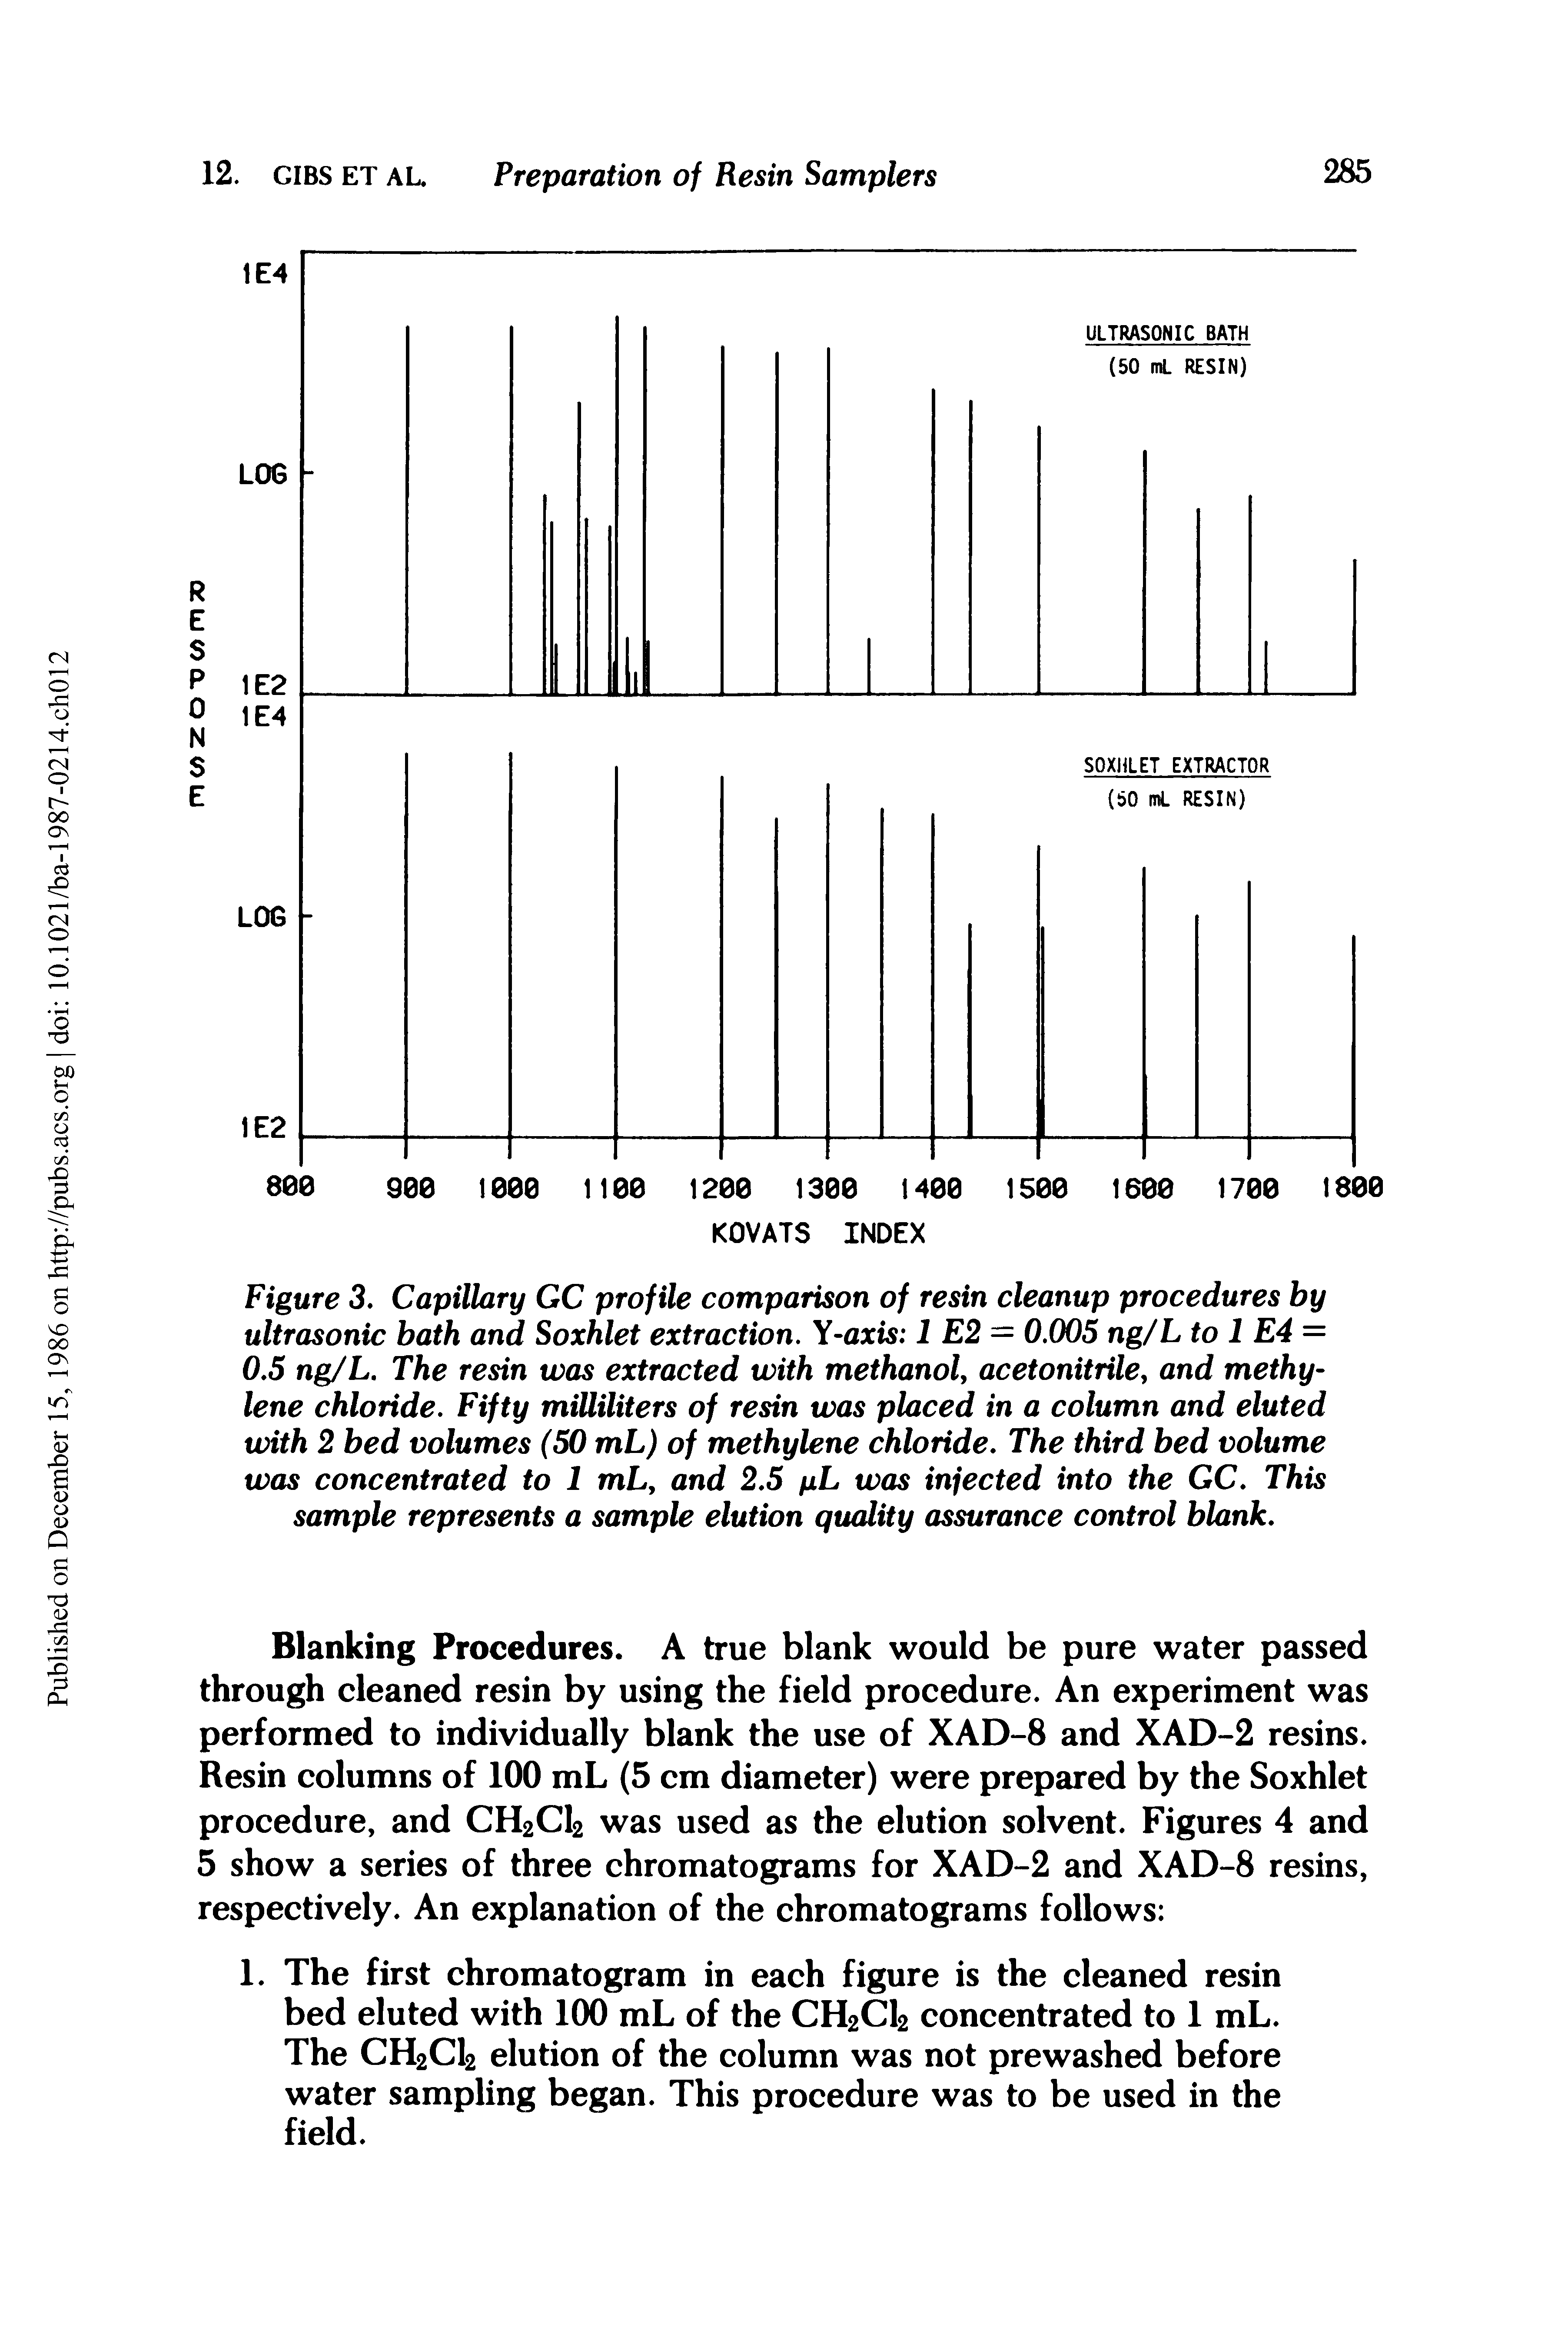 Figure 3. Capillary GC profile comparison of resin cleanup procedures by ultrasonic bath and Soxhlet extraction. Y-axis 1E2 — 0.005 ng/L to 1 E4 = 0.5 ng/L. The resin was extracted with methanol, acetonitrile, and methylene chloride. Fifty milliliters of resin was placed in a column and eluted with 2 bed volumes (50 mL) of methylene chloride. The third bed volume was concentrated to 1 mL, and 2.5 pL was injected into the GC. This sample represents a sample elution quality assurance control blank.